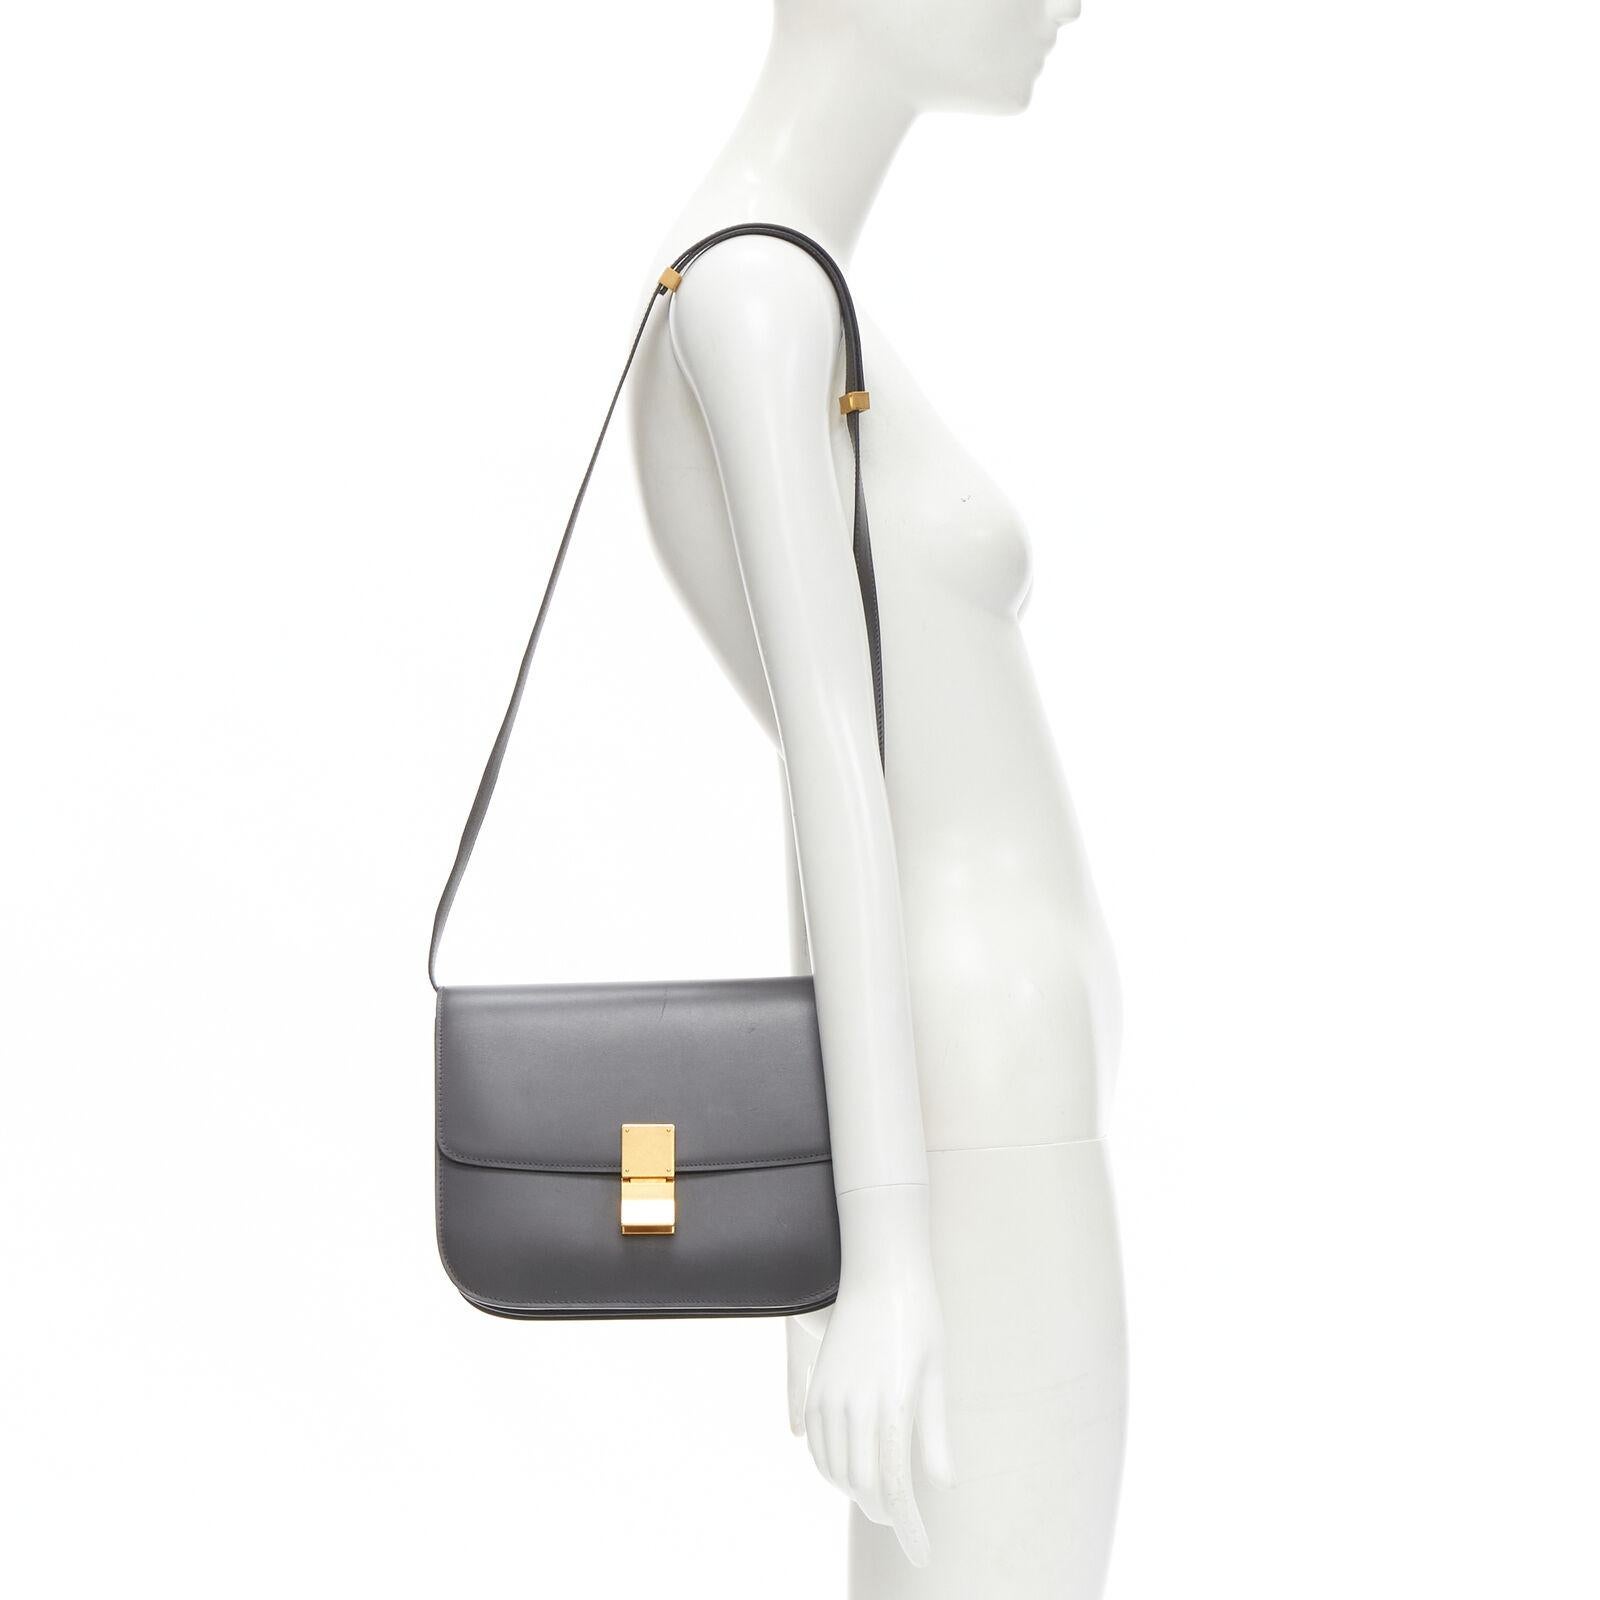 CELINE Classic Box grey calfskin leather buckle bag medium
Reference: KEDG/A00244
Brand: Celine
Designer: Phoebe Philo
Model: Classic Box
Material: Calfskin Leather
Color: Grey, Gold
Pattern: Solid
Closure: Push Clasp
Lining: Leather
Extra Details: